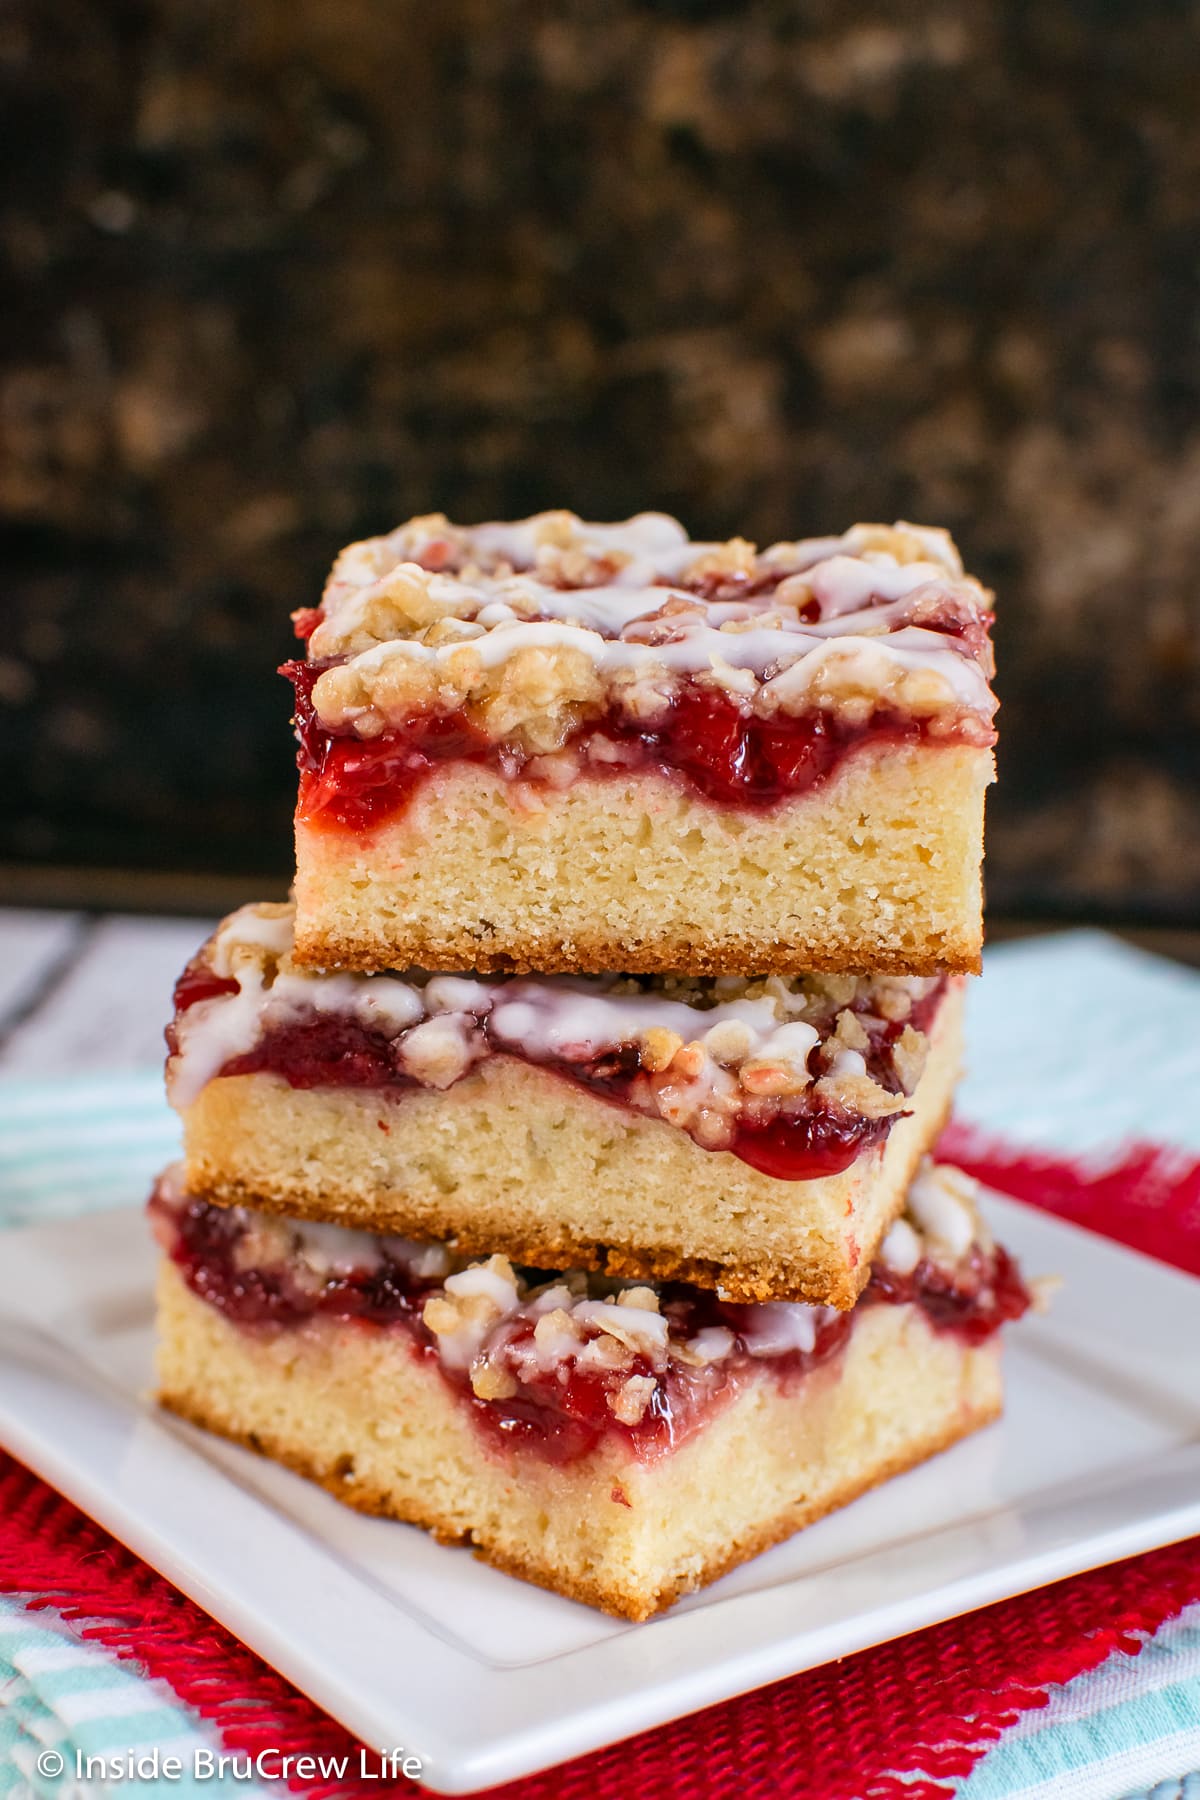 A stack of three squares of coffee cake made with cherries on a white plate.